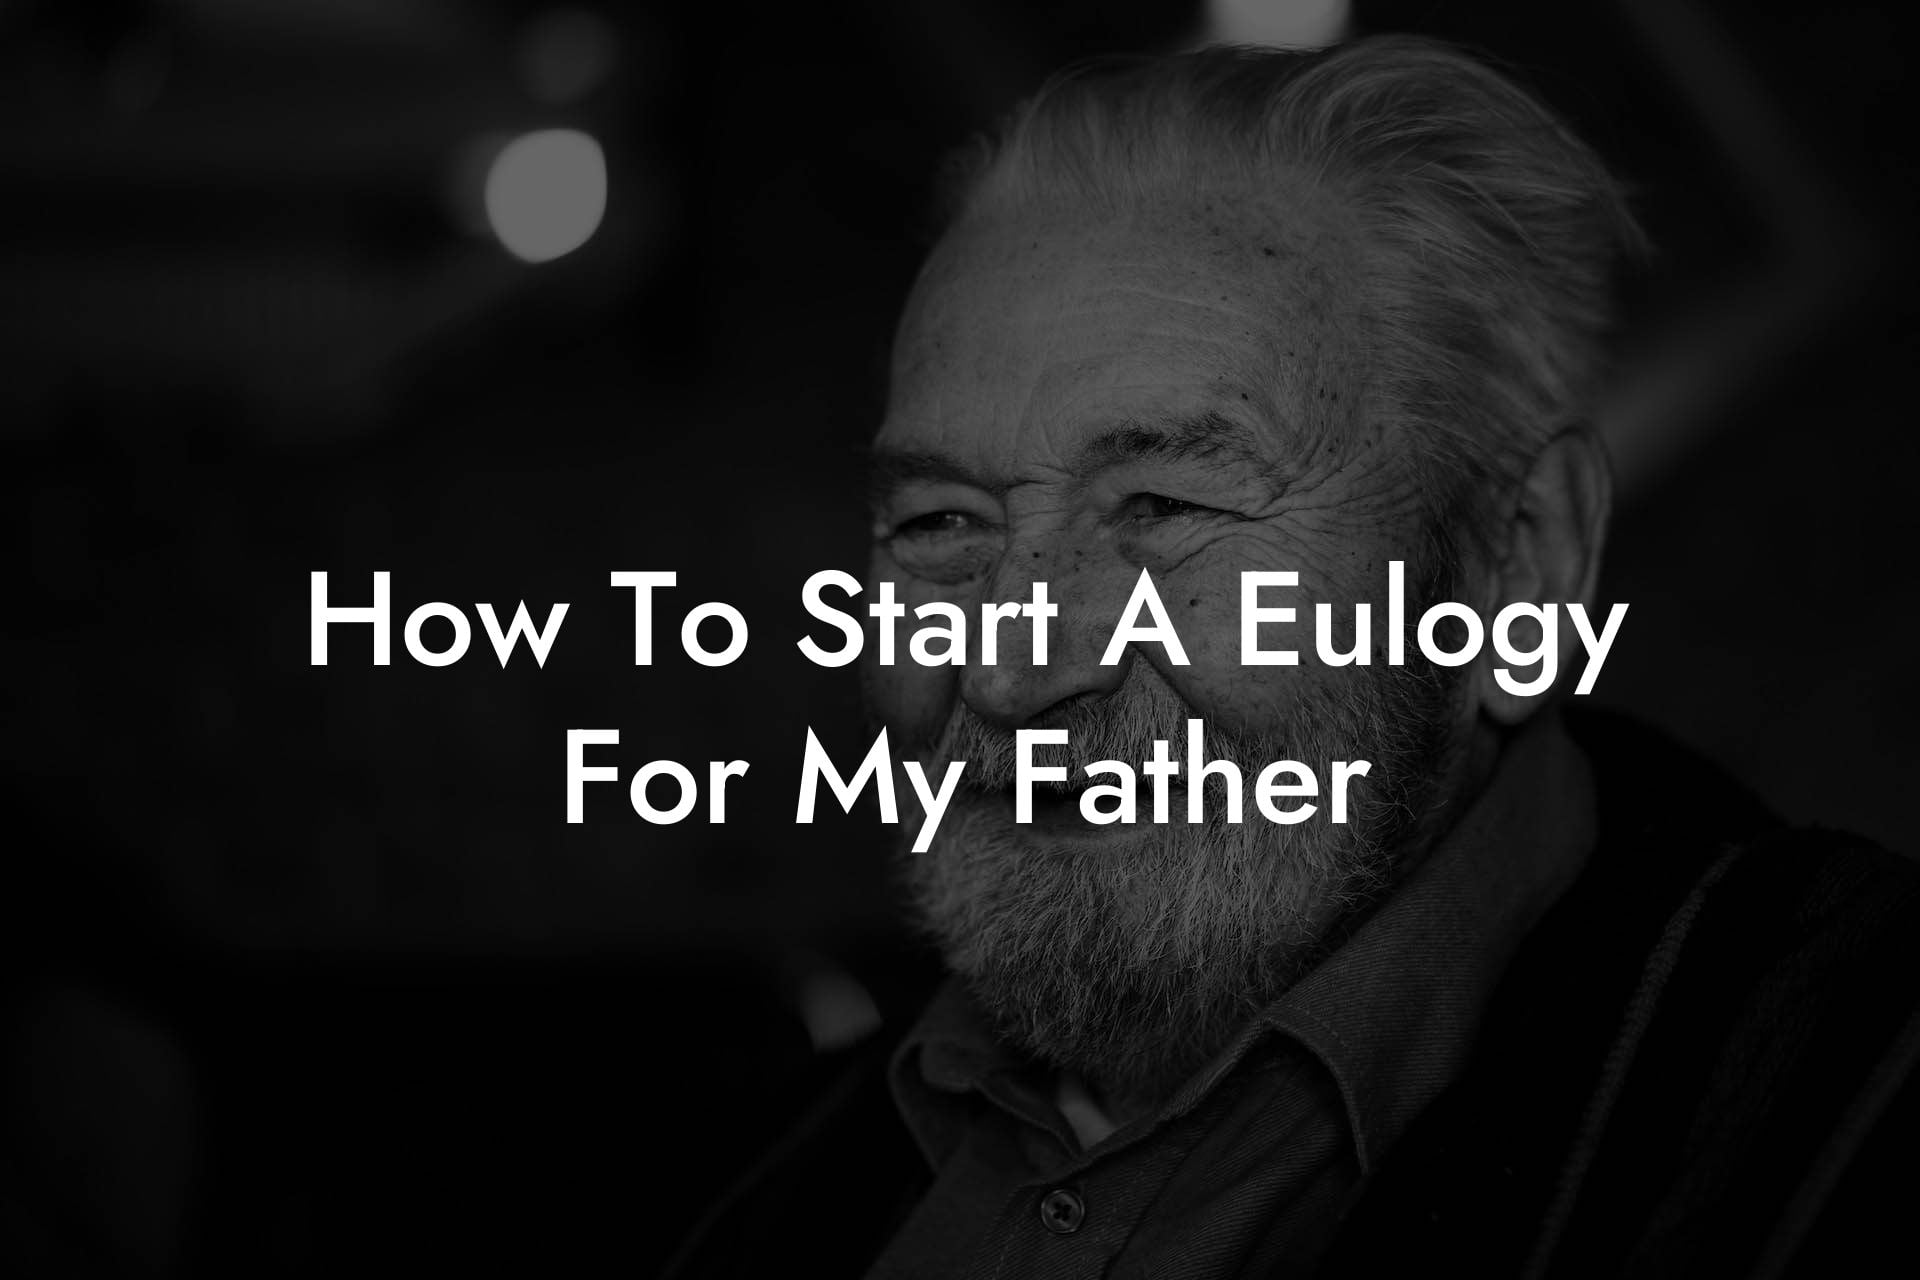 How To Start A Eulogy For My Father